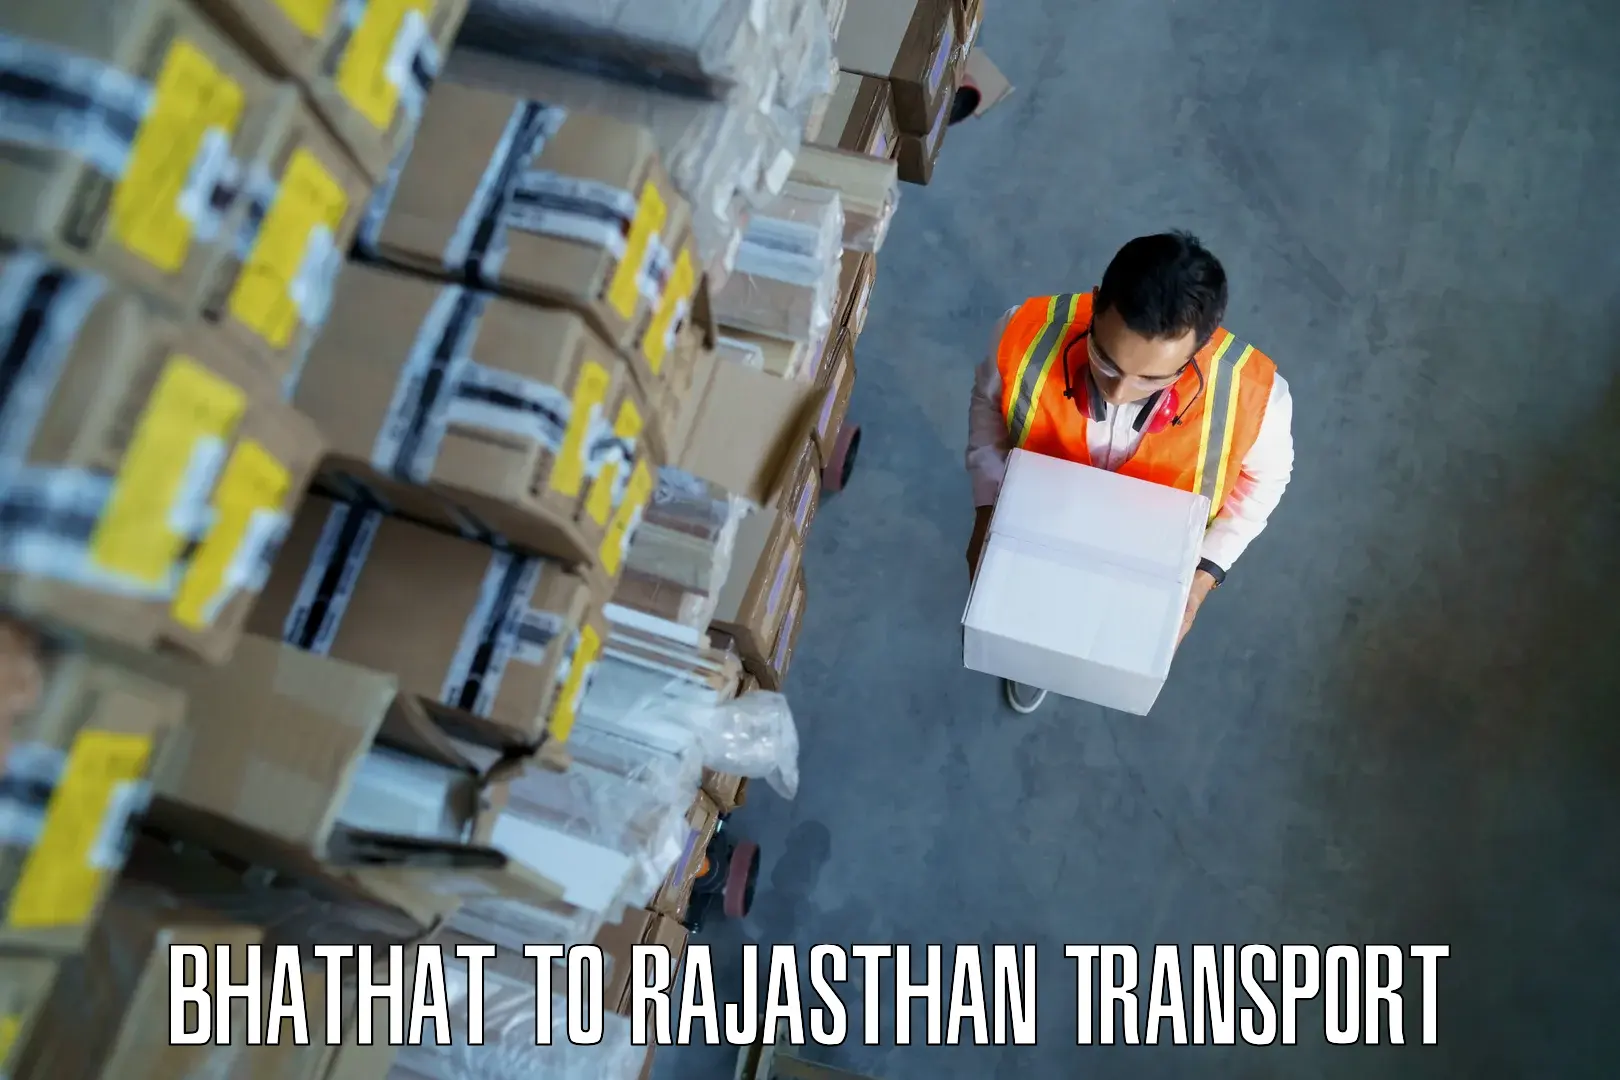 Parcel transport services Bhathat to Laxmangarh